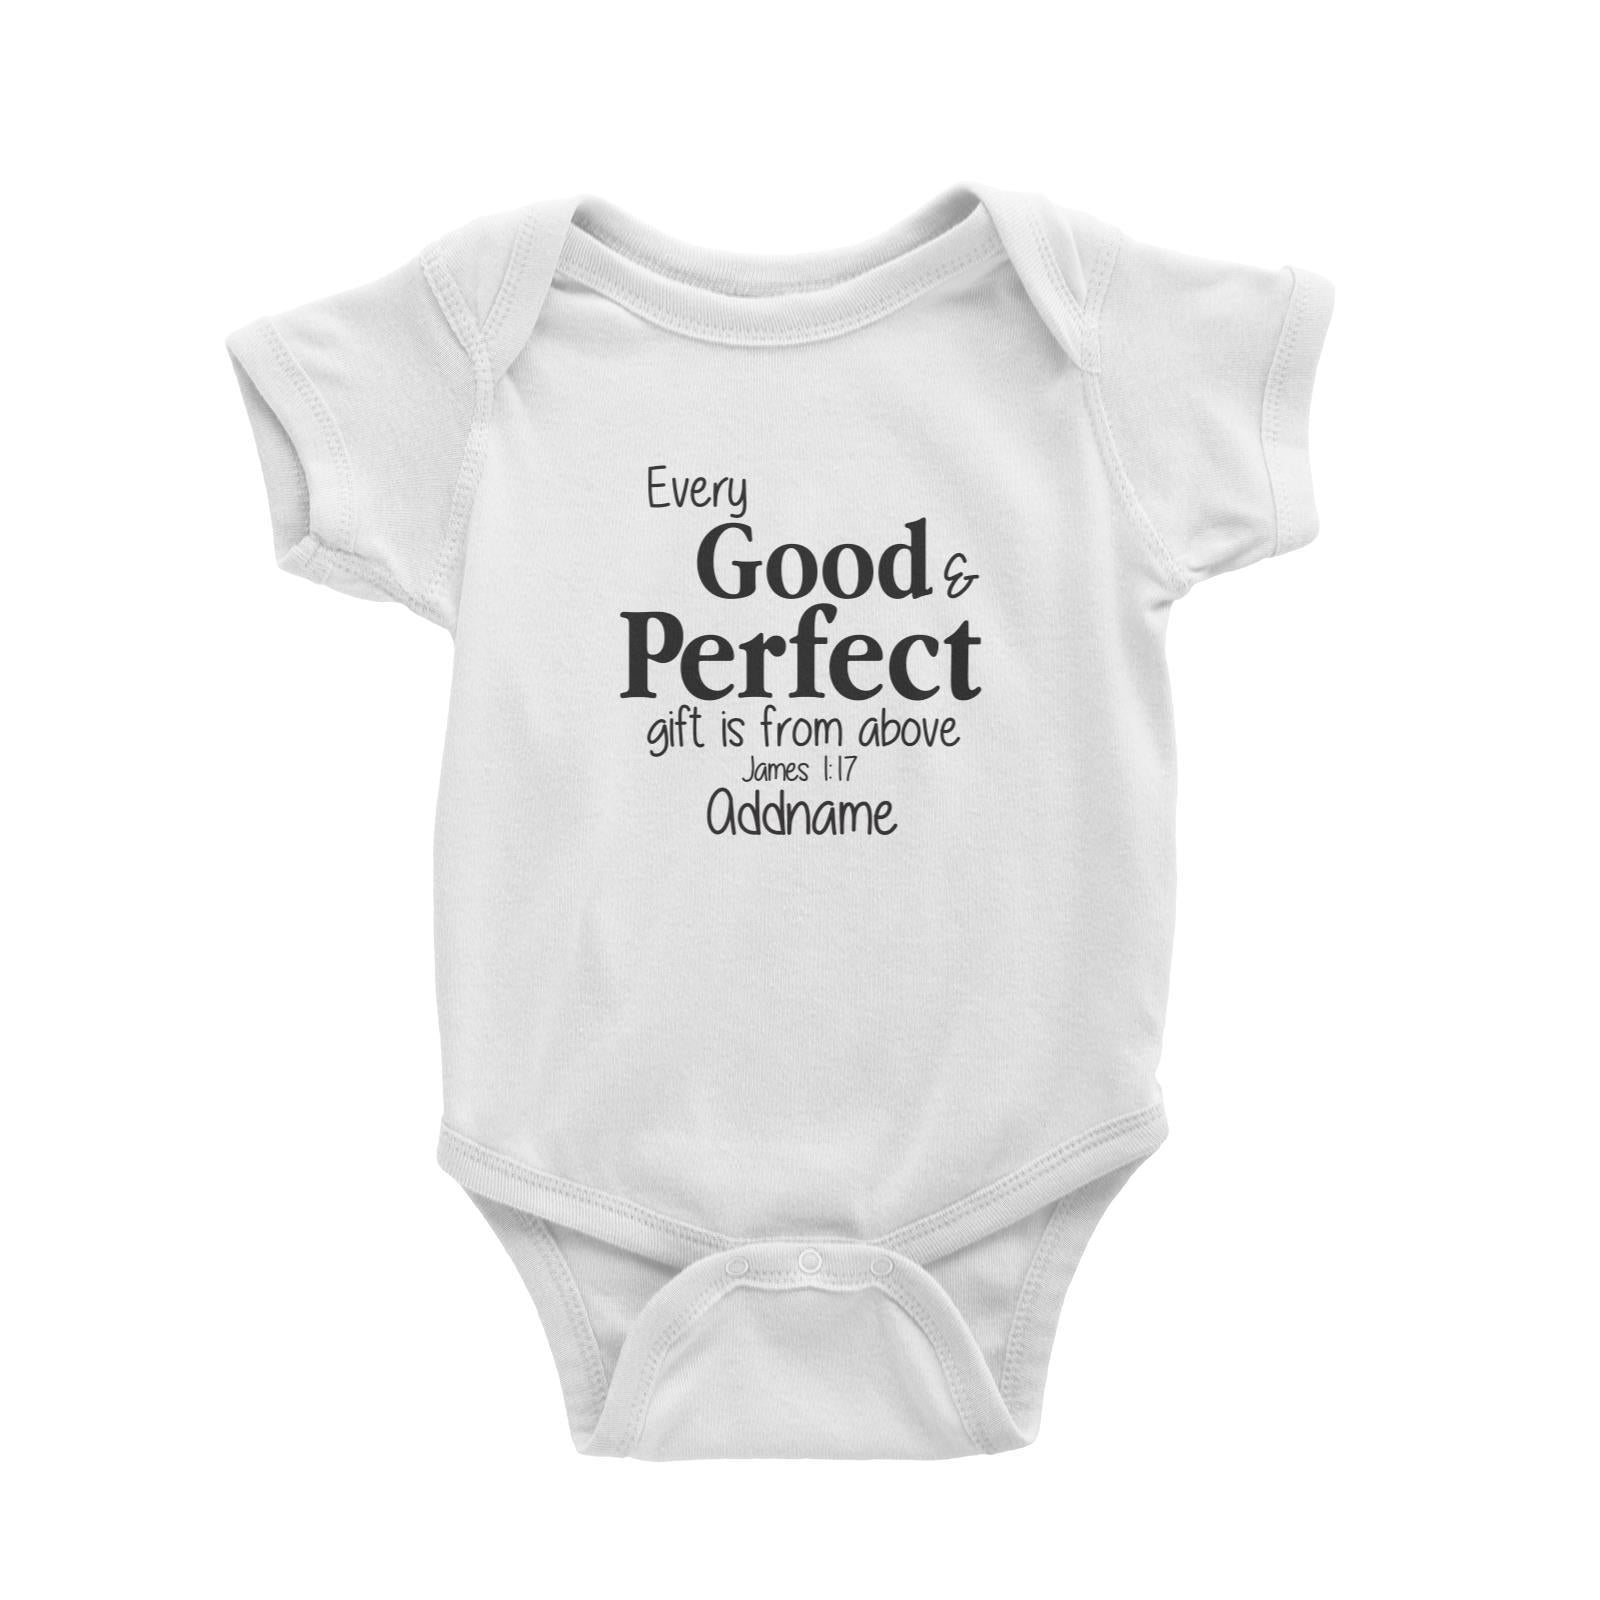 Christ Newborn Every Good and Perfect Gift is from Above James 1.17 Addname Baby Romper